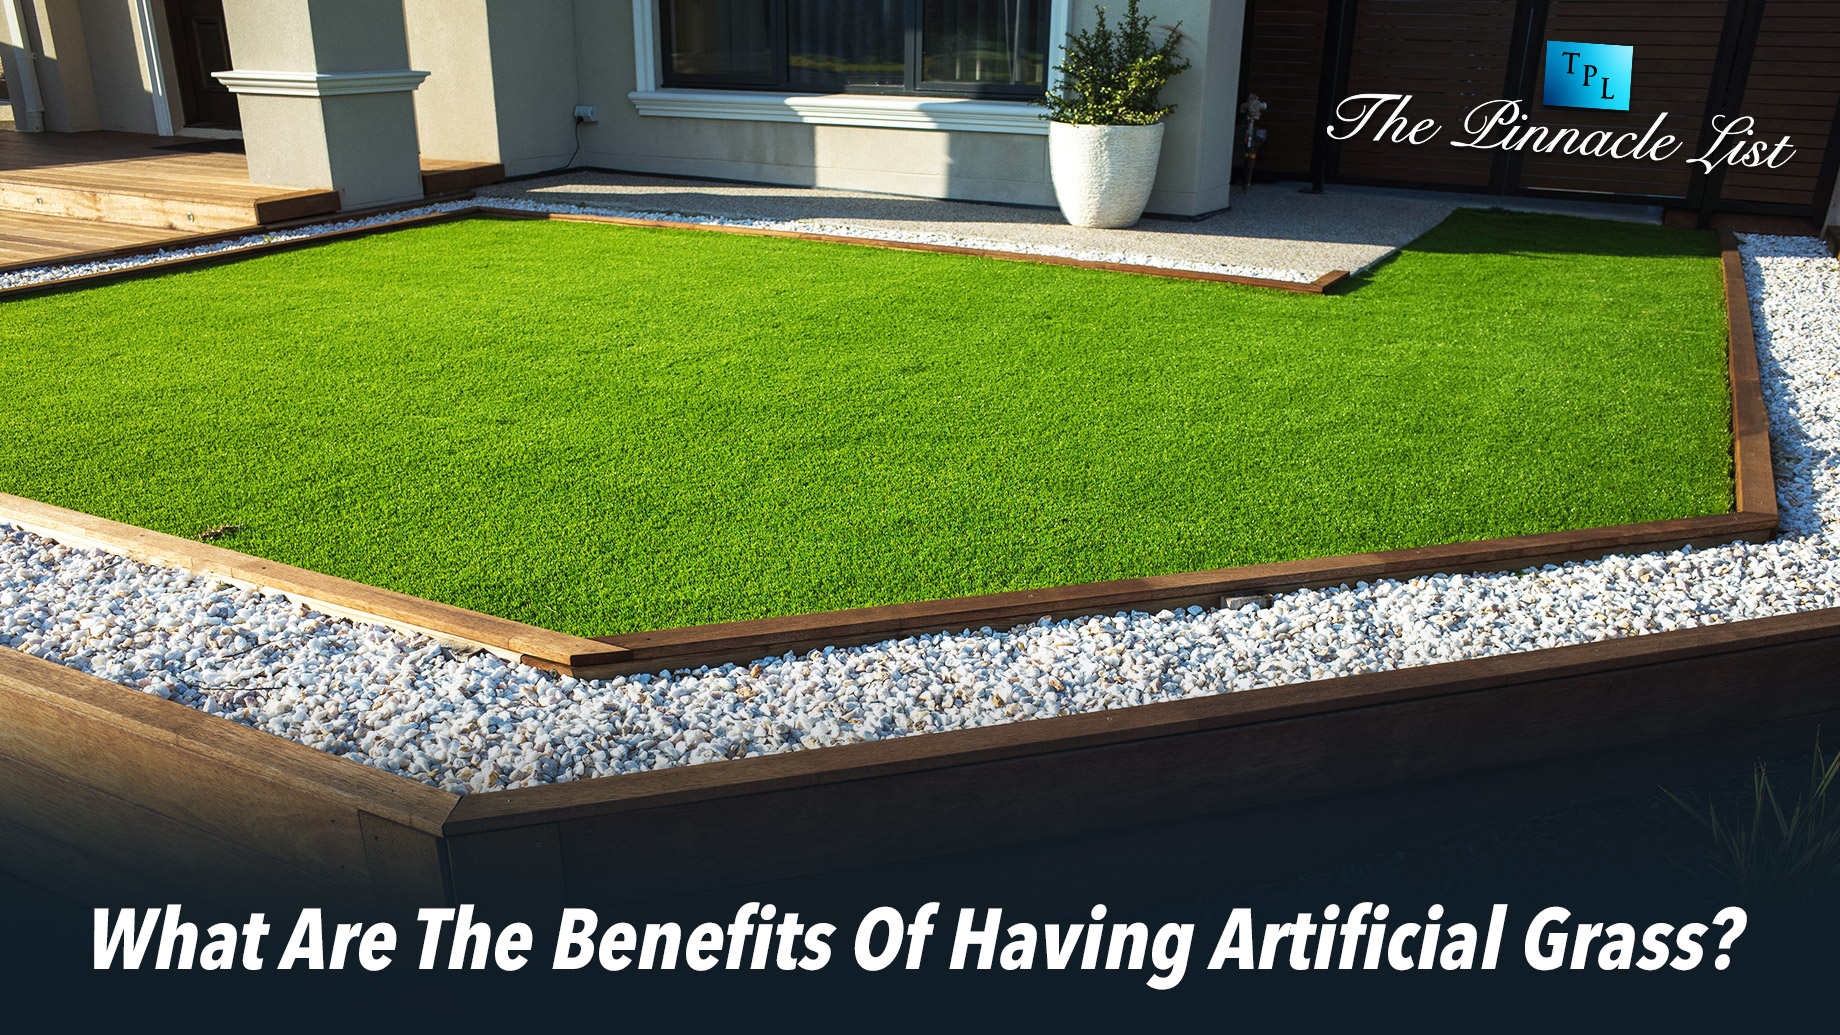 What Are The Benefits Of Having Artificial Grass?